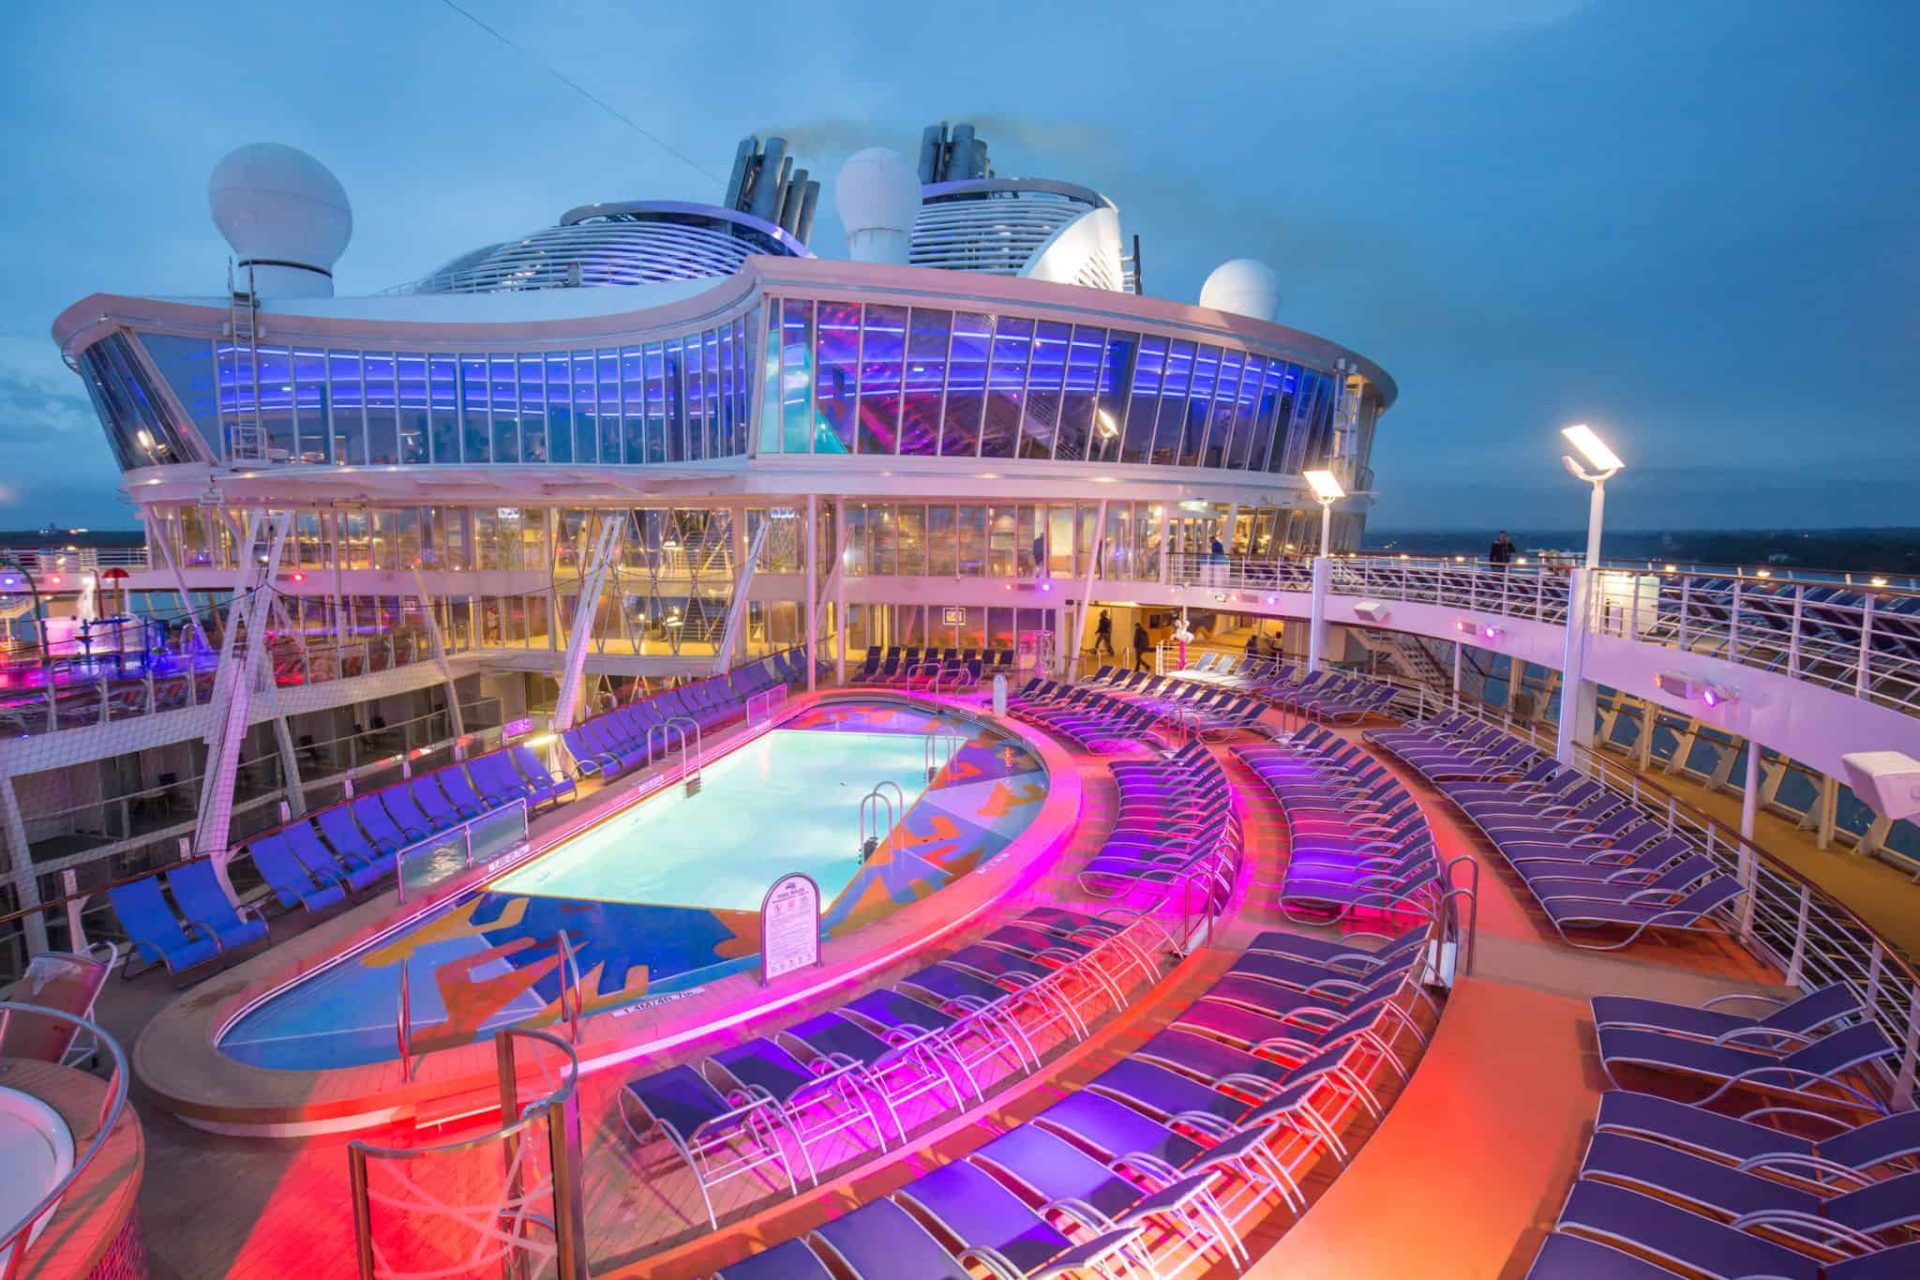 A Look Inside Photo Gallery of Harmony of the Seas